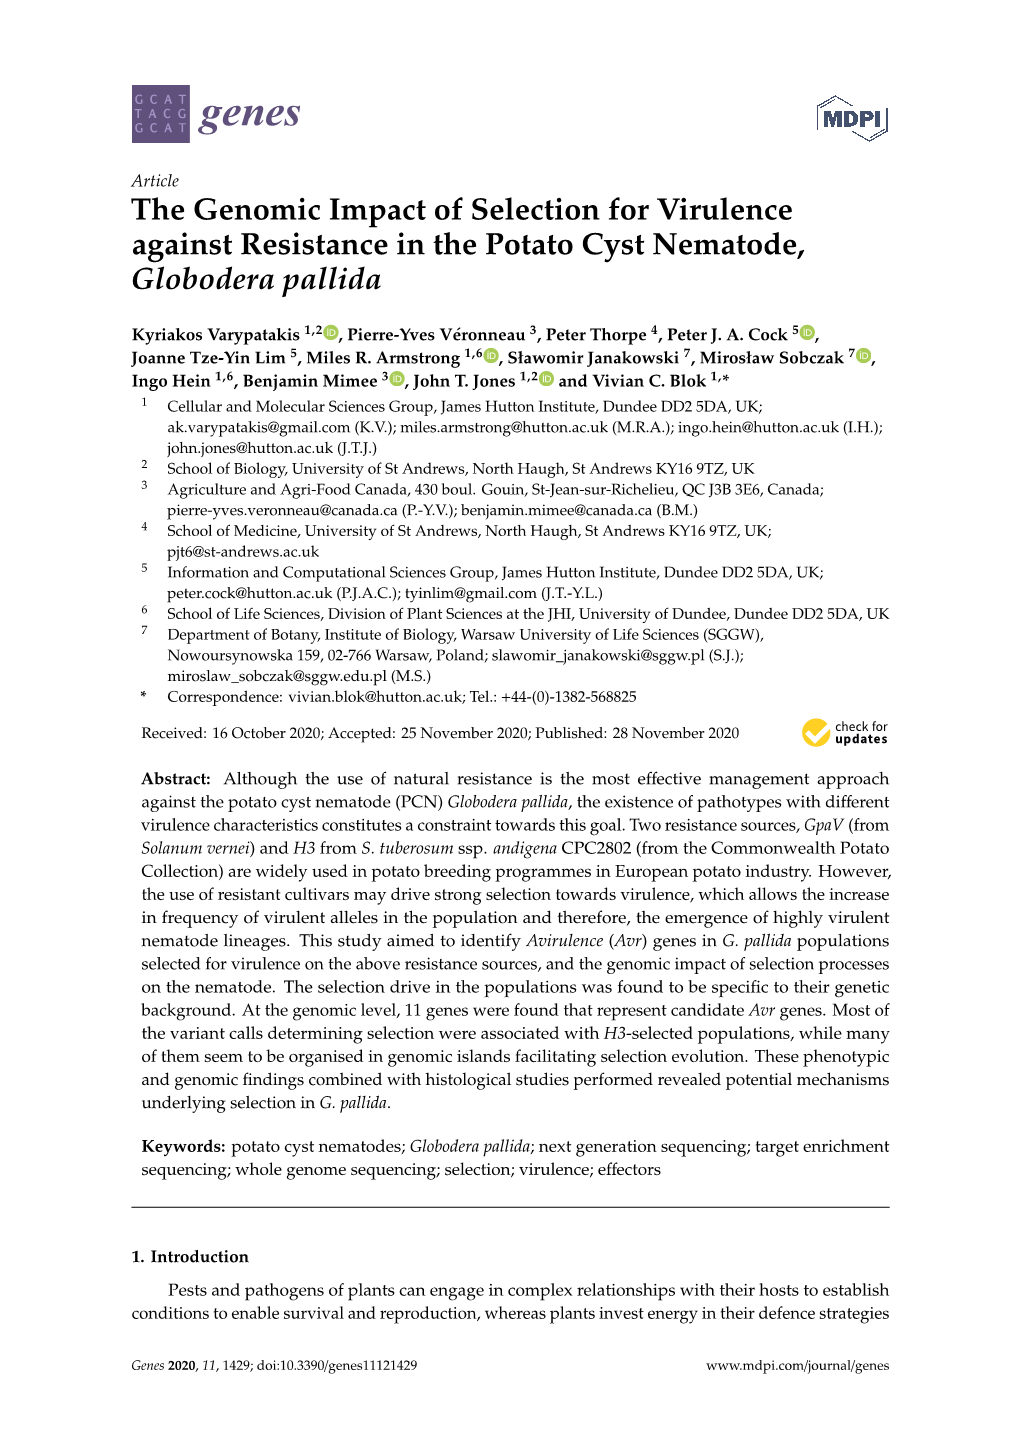 The Genomic Impact of Selection for Virulence Against Resistance in the Potato Cyst Nematode, Globodera Pallida